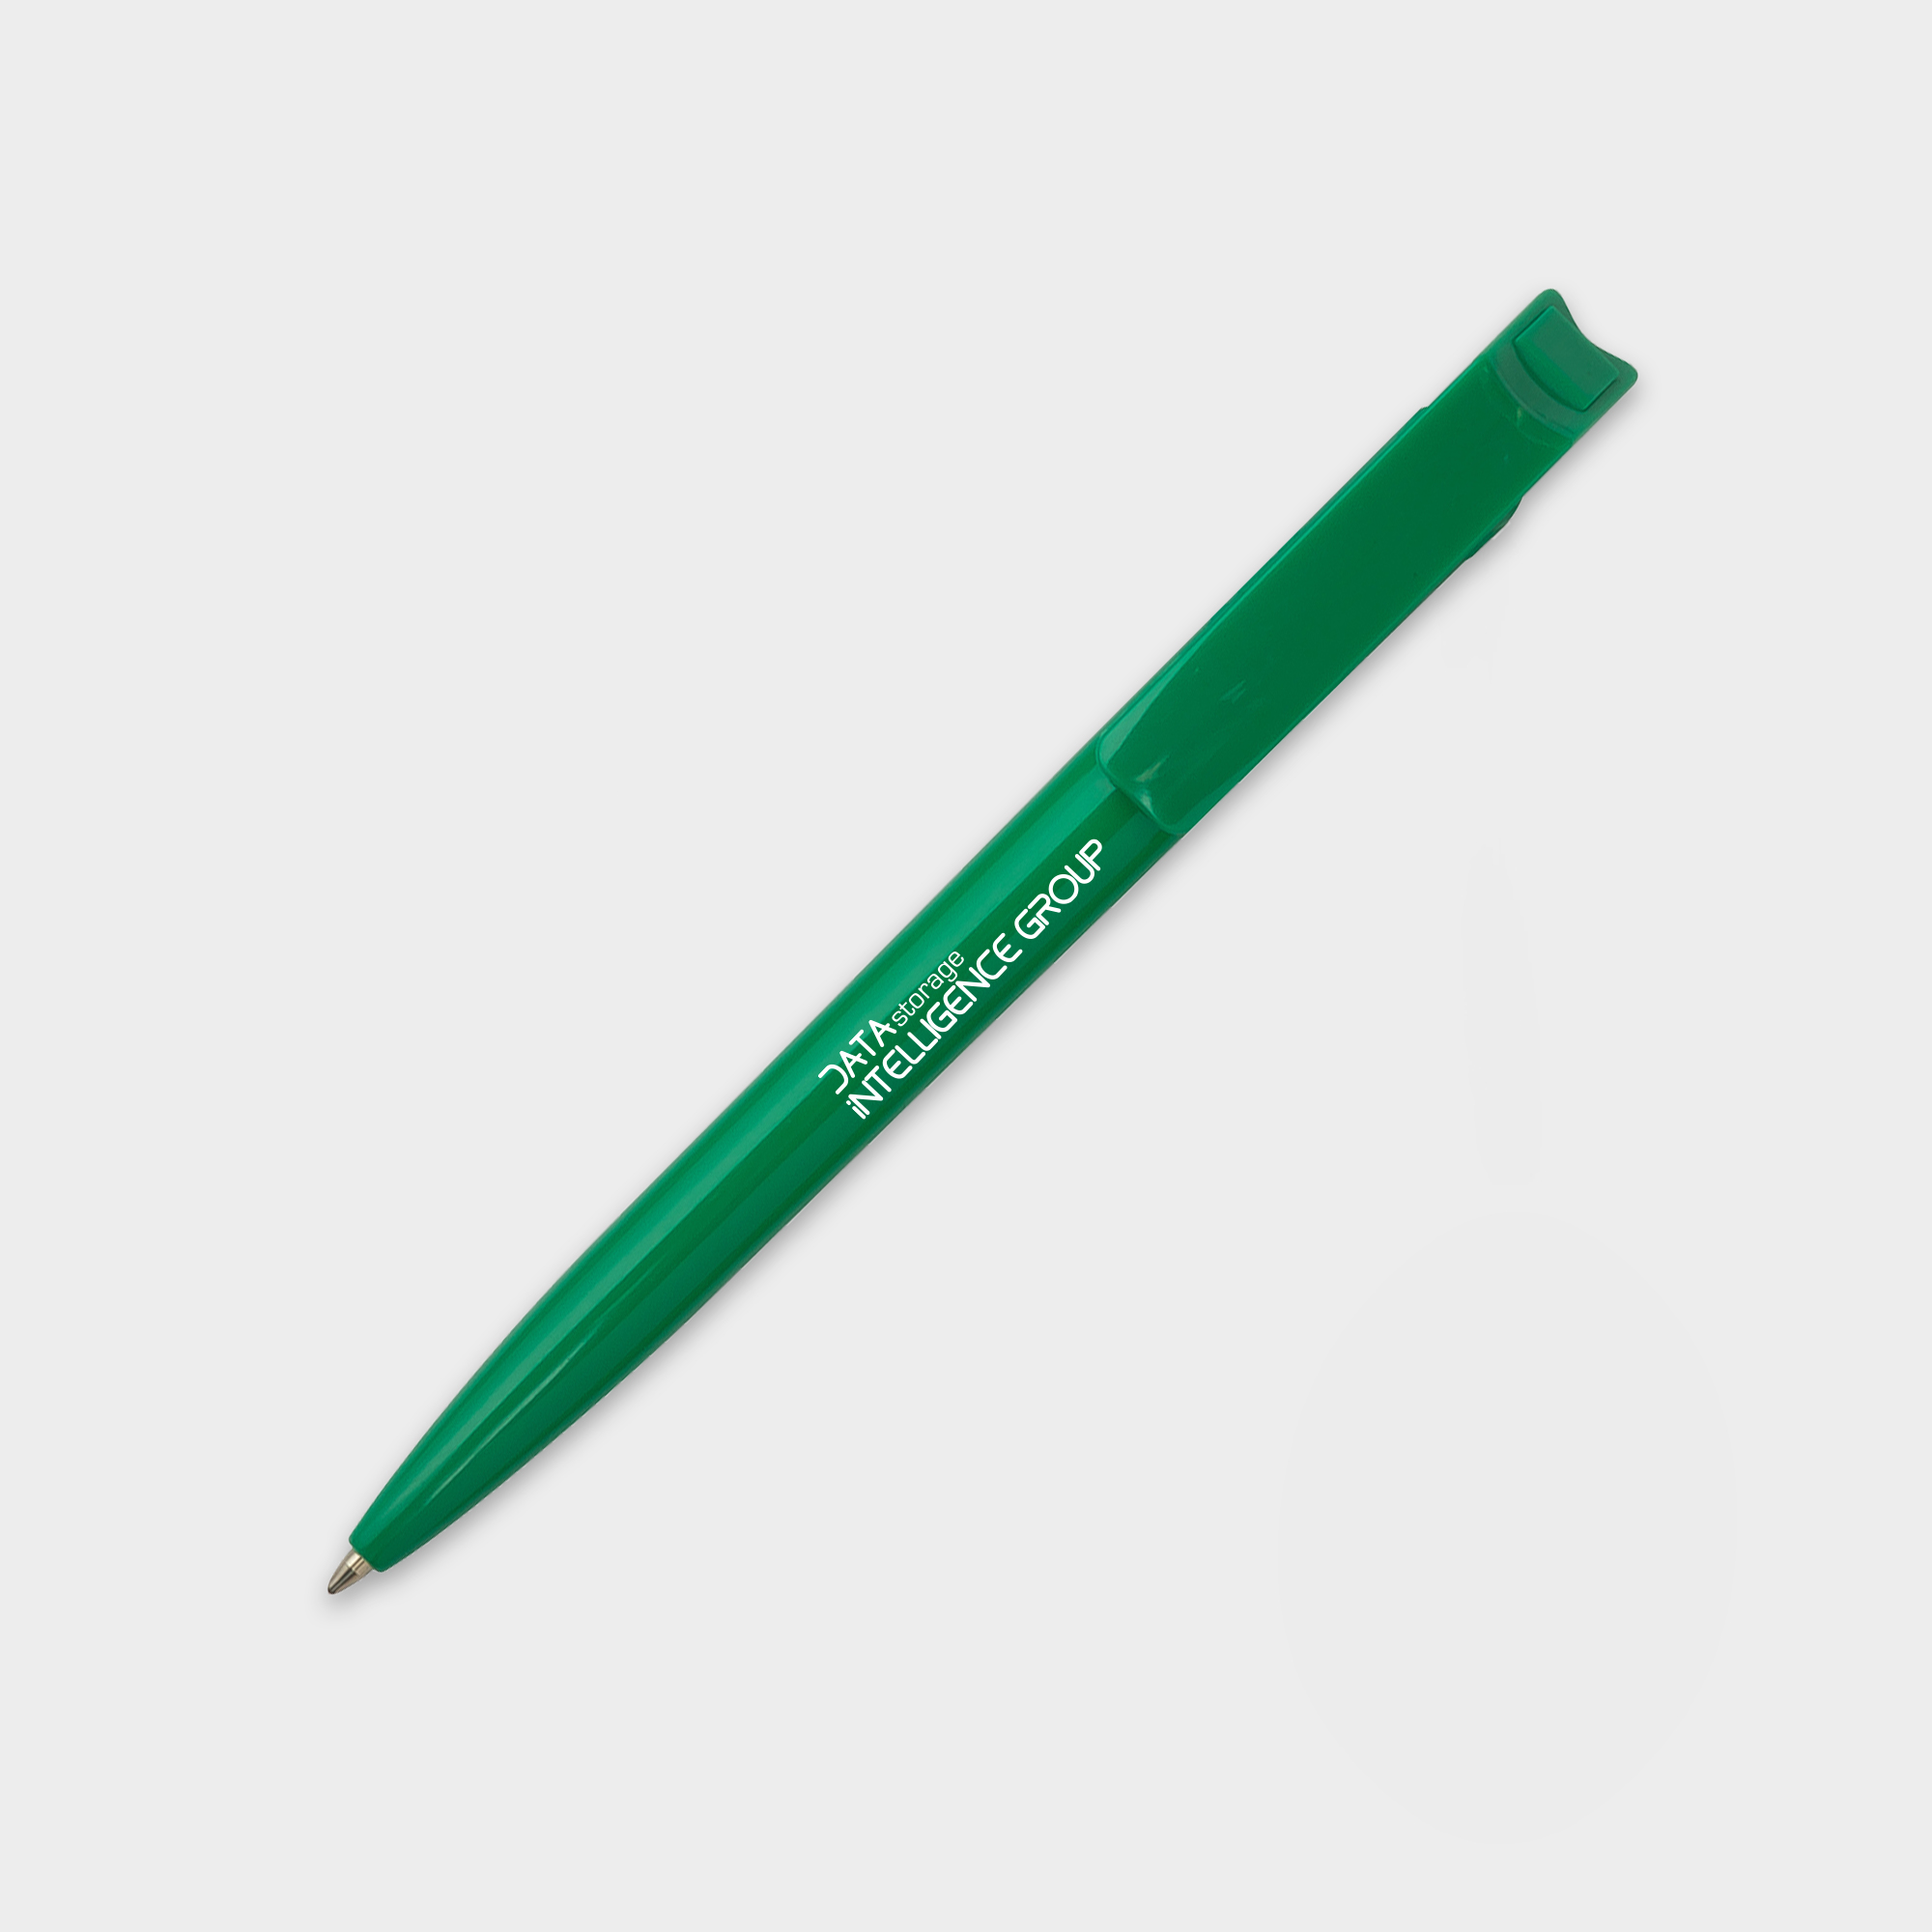 The Green & Good Litani Pen. An eco-friendly and high-quality pen made from recycled plastic bottles (rPET) with black ink refills and a solid colour body. Made in the EU and available in a variety of colours. Green